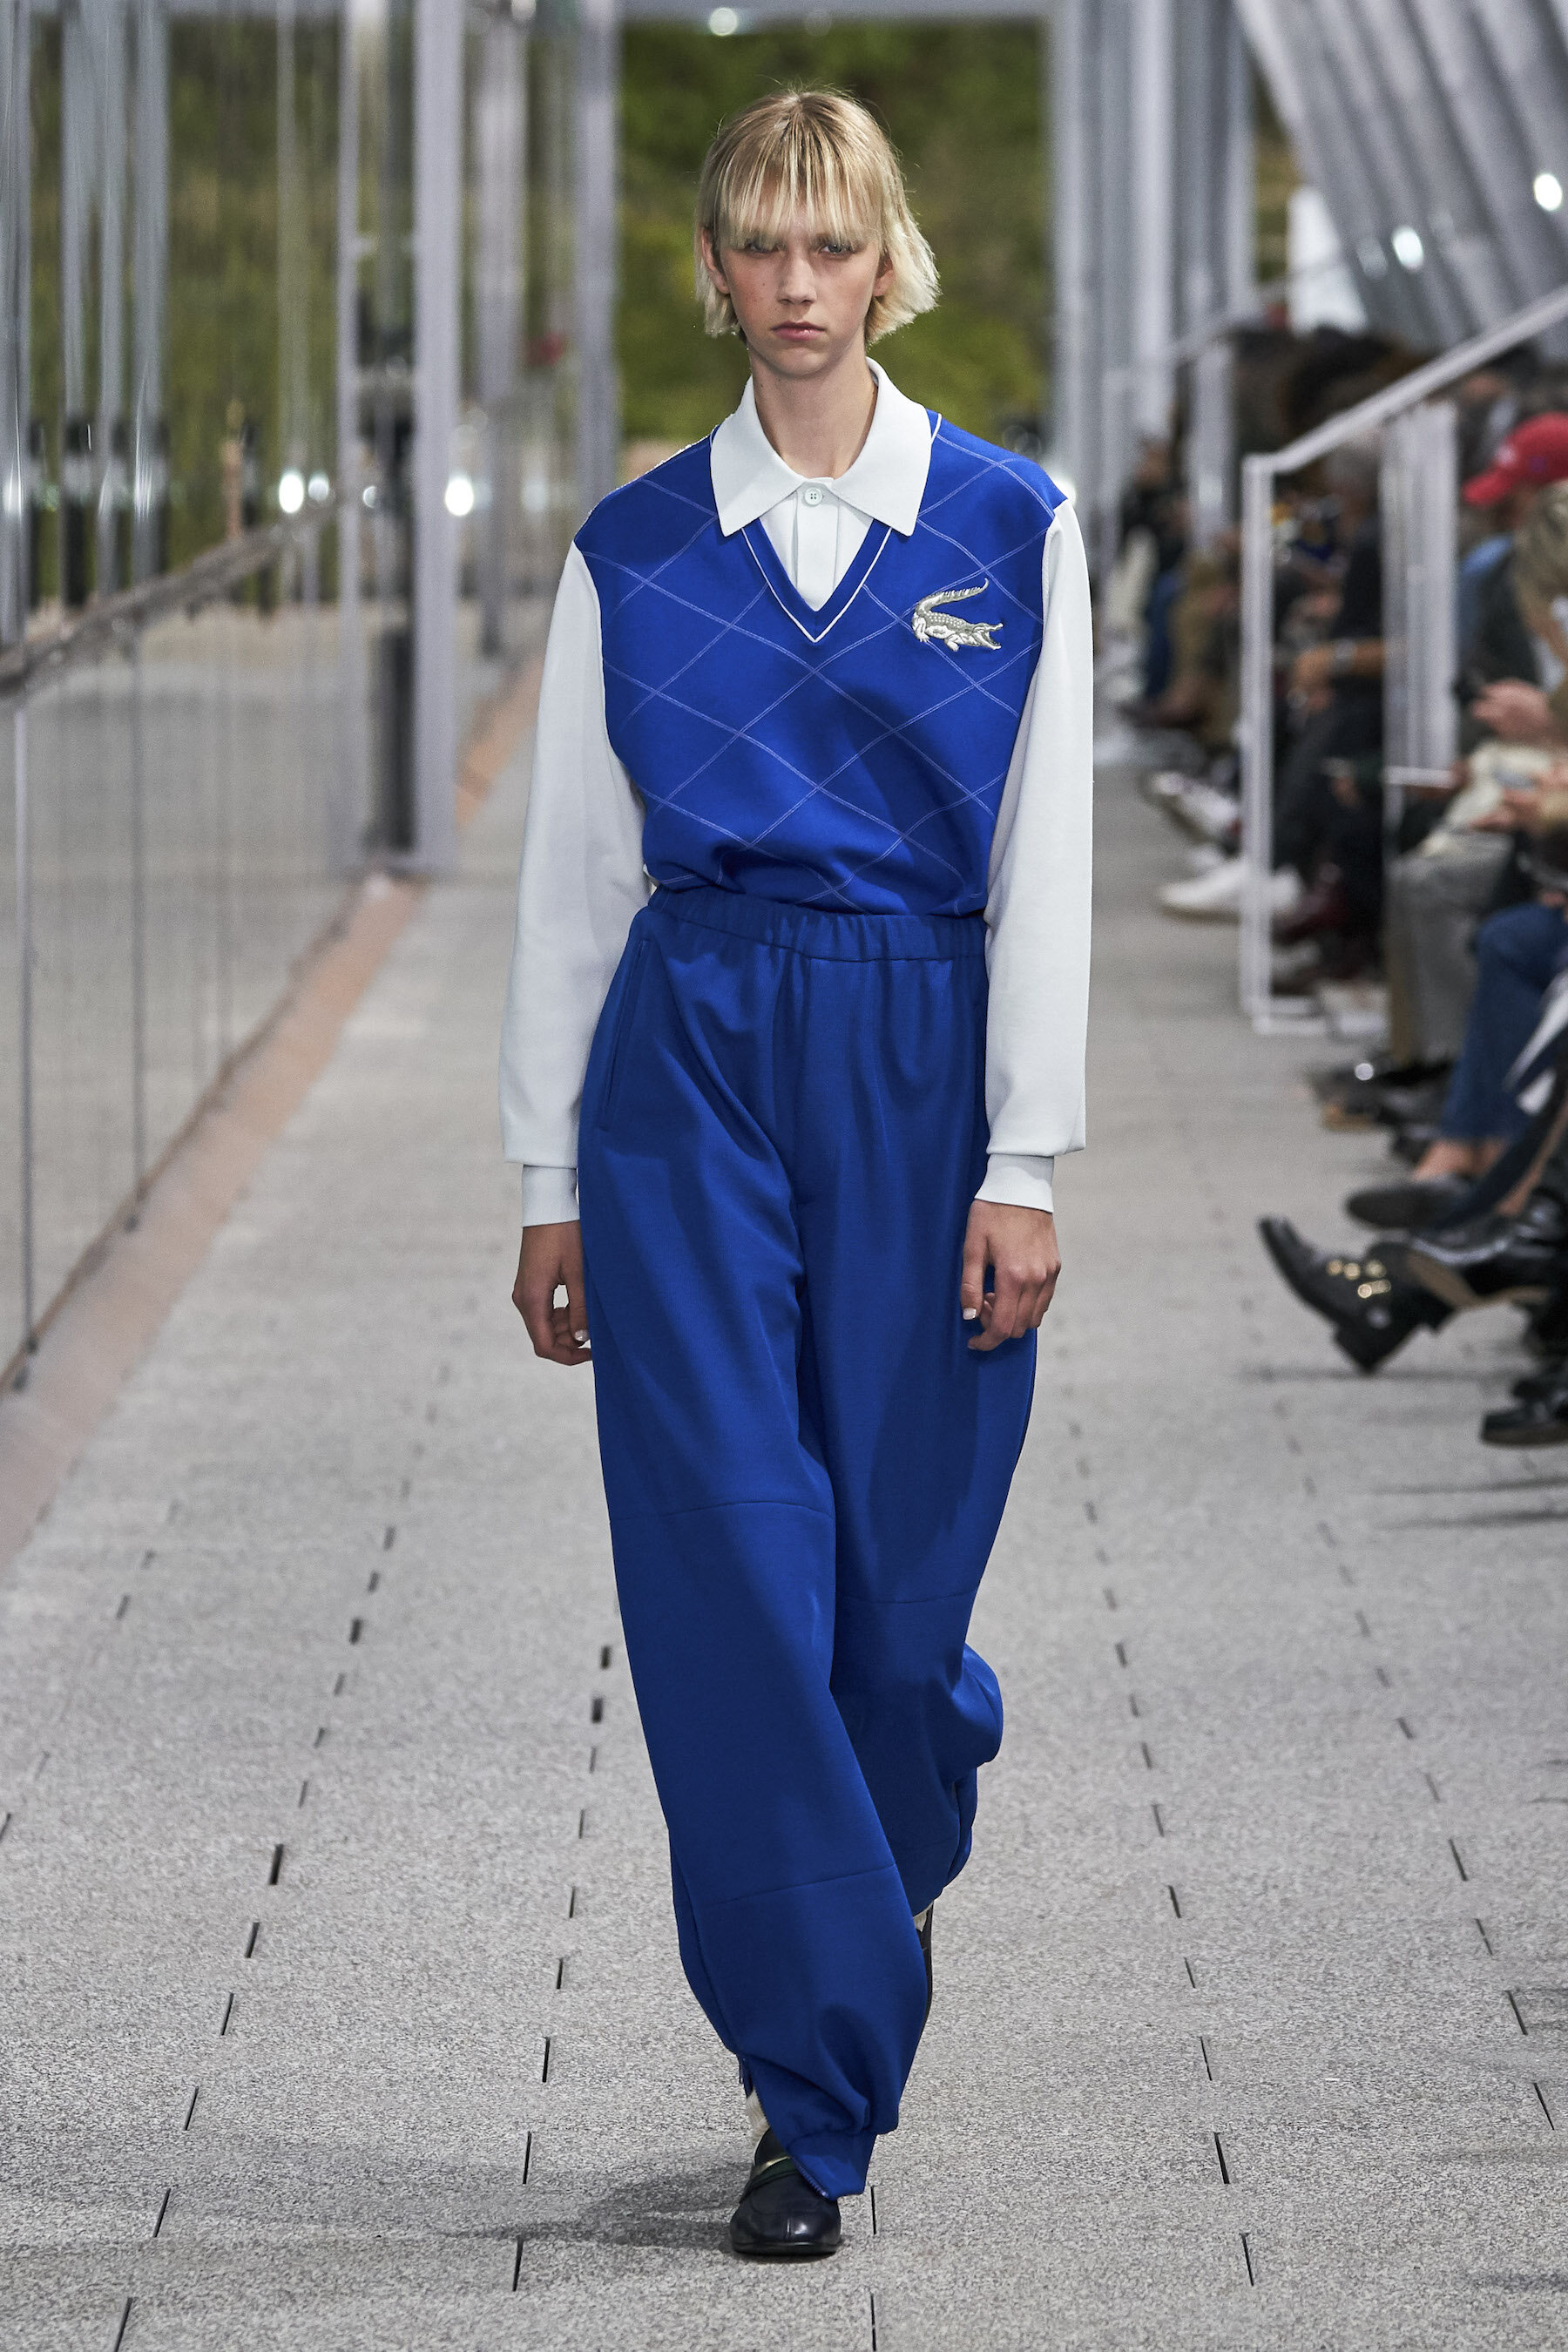 Lacoste SS20_LOOK 51 by Alessandro Lucioni  Imaxtree.com.jpg